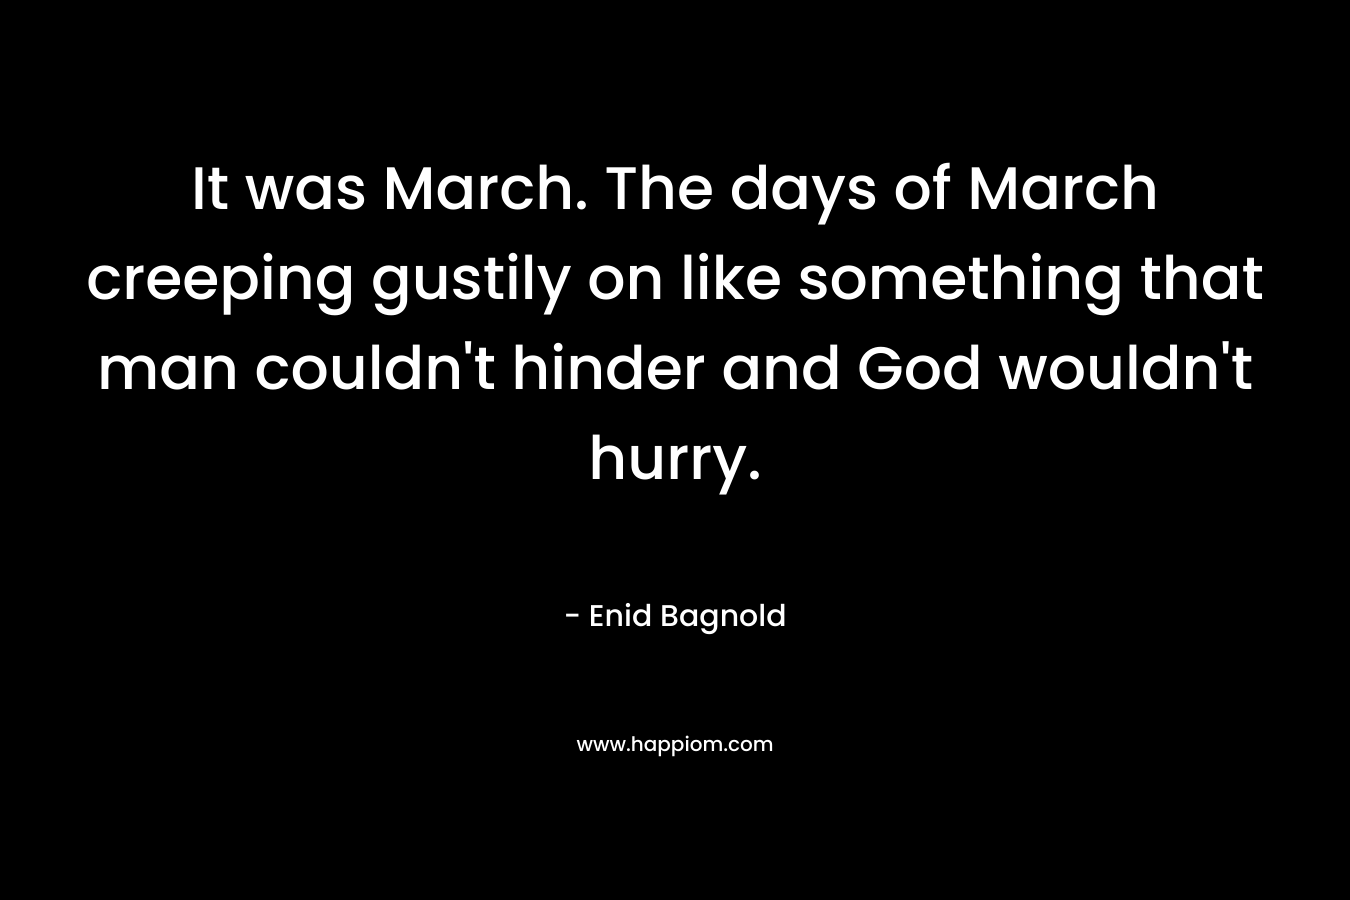 It was March. The days of March creeping gustily on like something that man couldn't hinder and God wouldn't hurry.